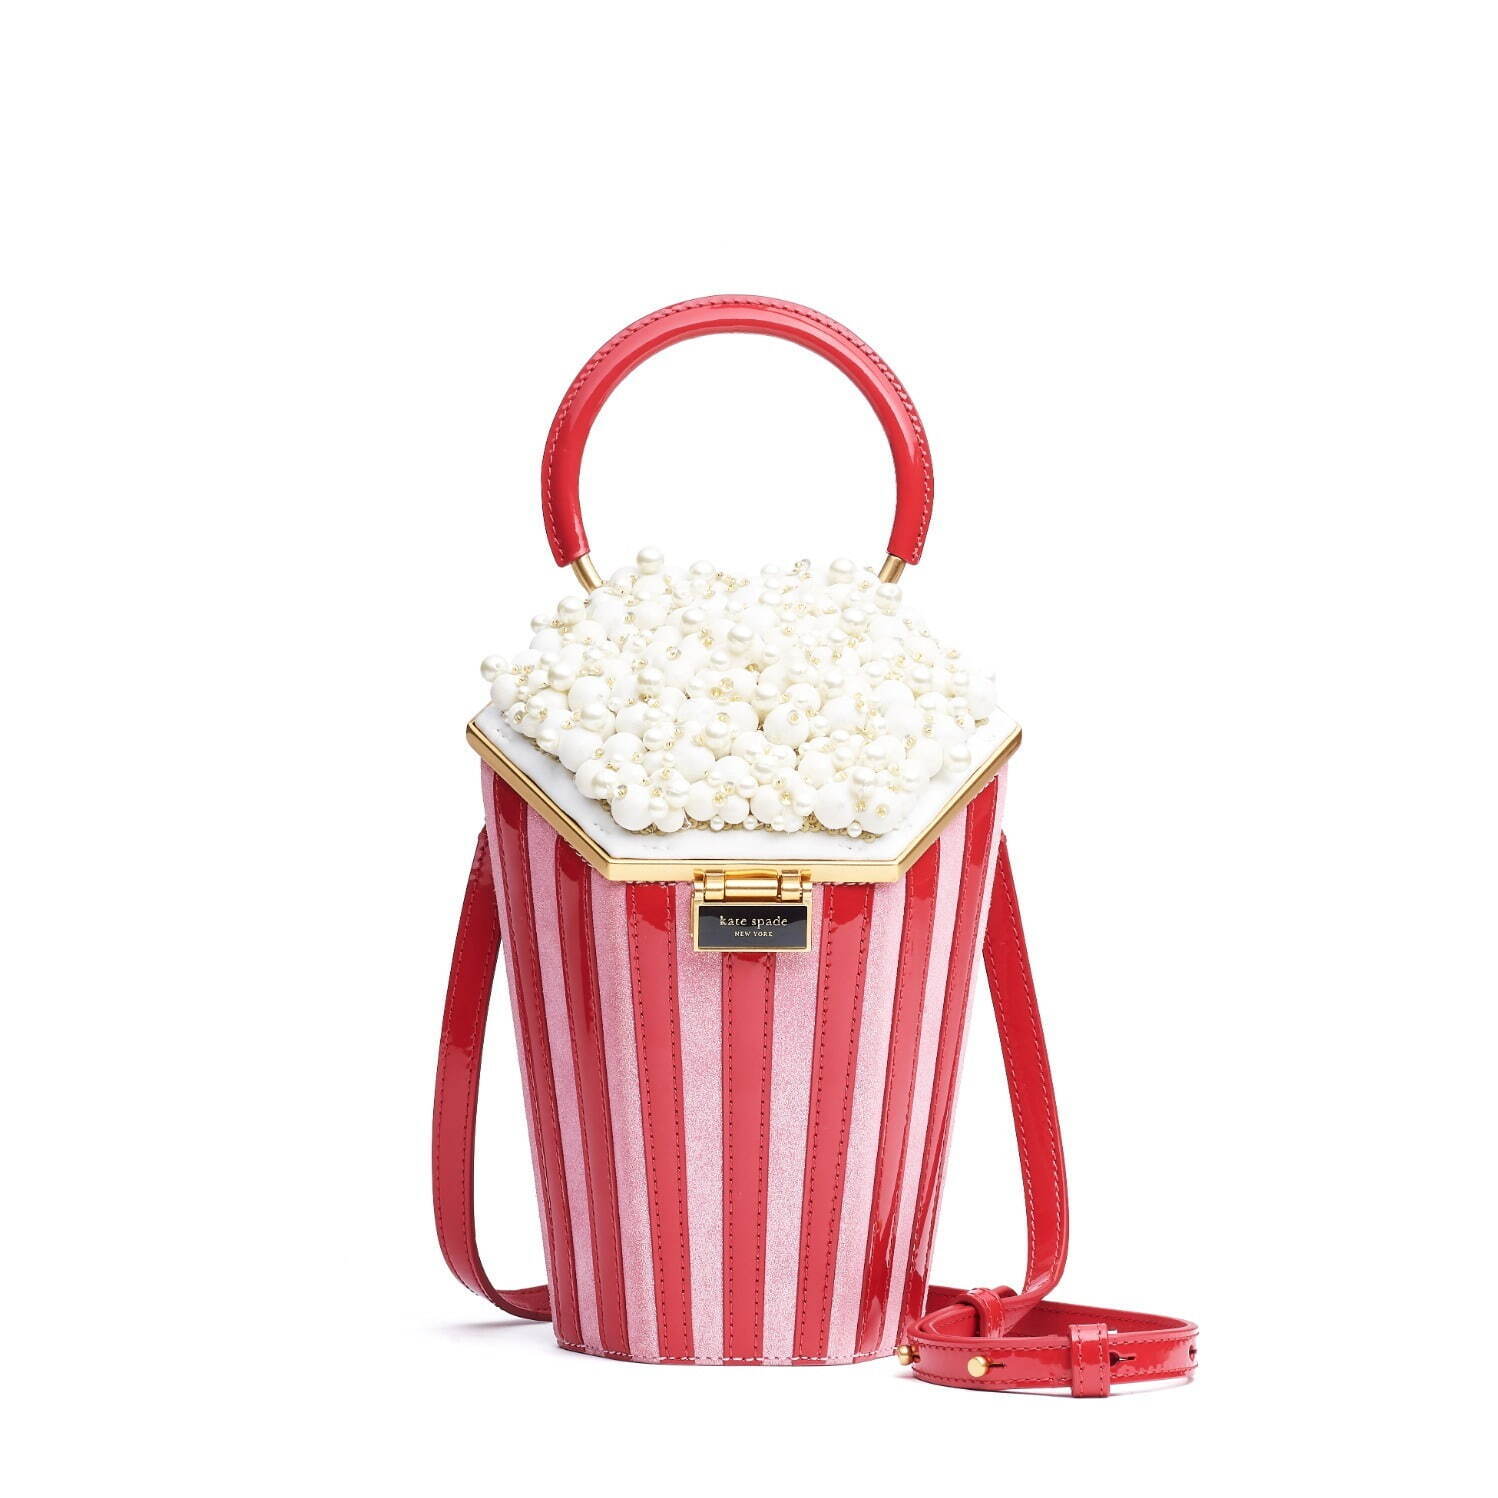 whats popping embellished suede and patent leather 3d popcorn top handle 94,600円
(H20×W16×D12cm)